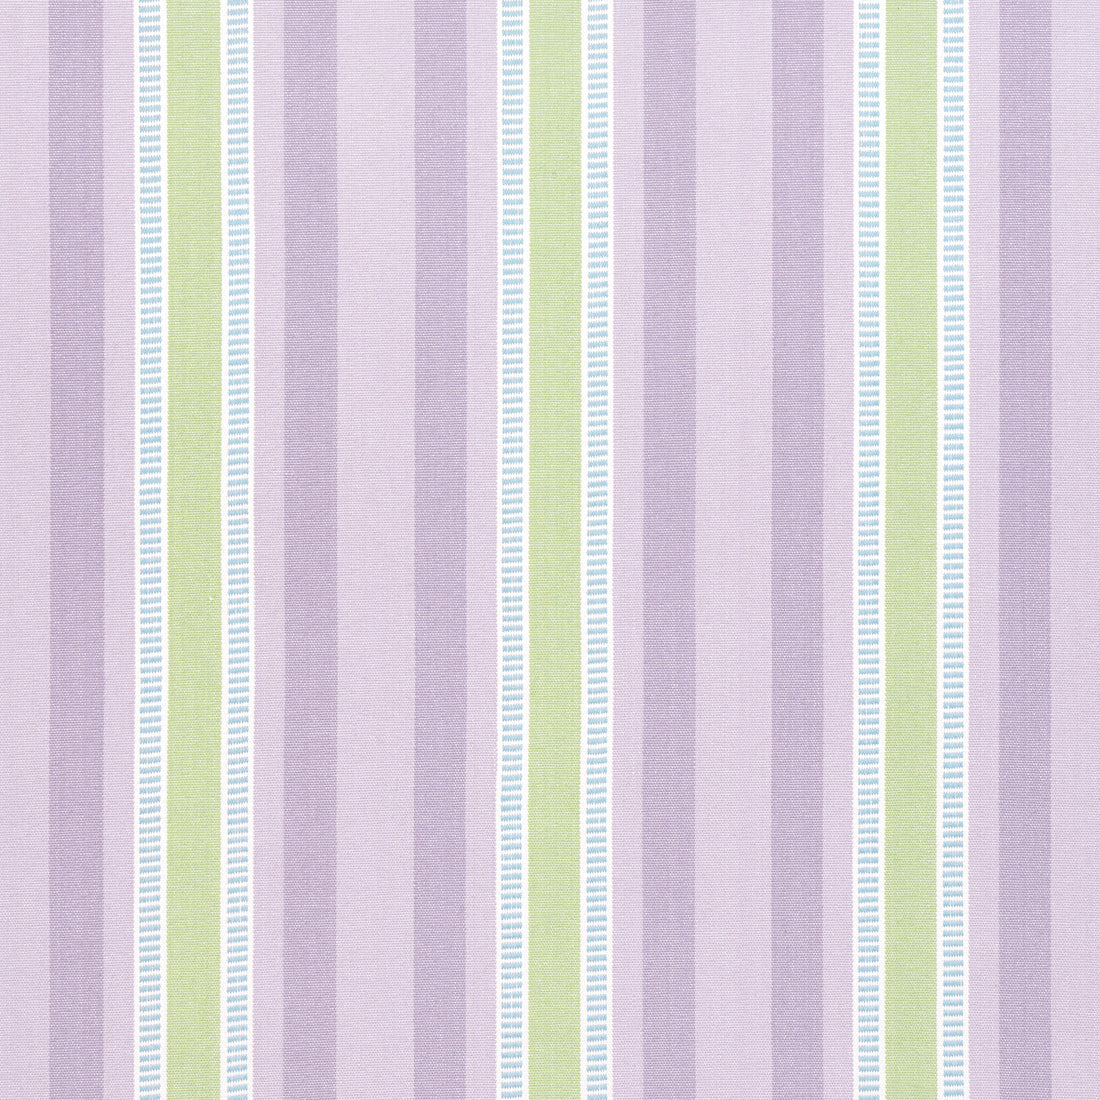 Dearden Stripe fabric in lavender and sage color - pattern number AW23153 - by Anna French in the Willow Tree collection